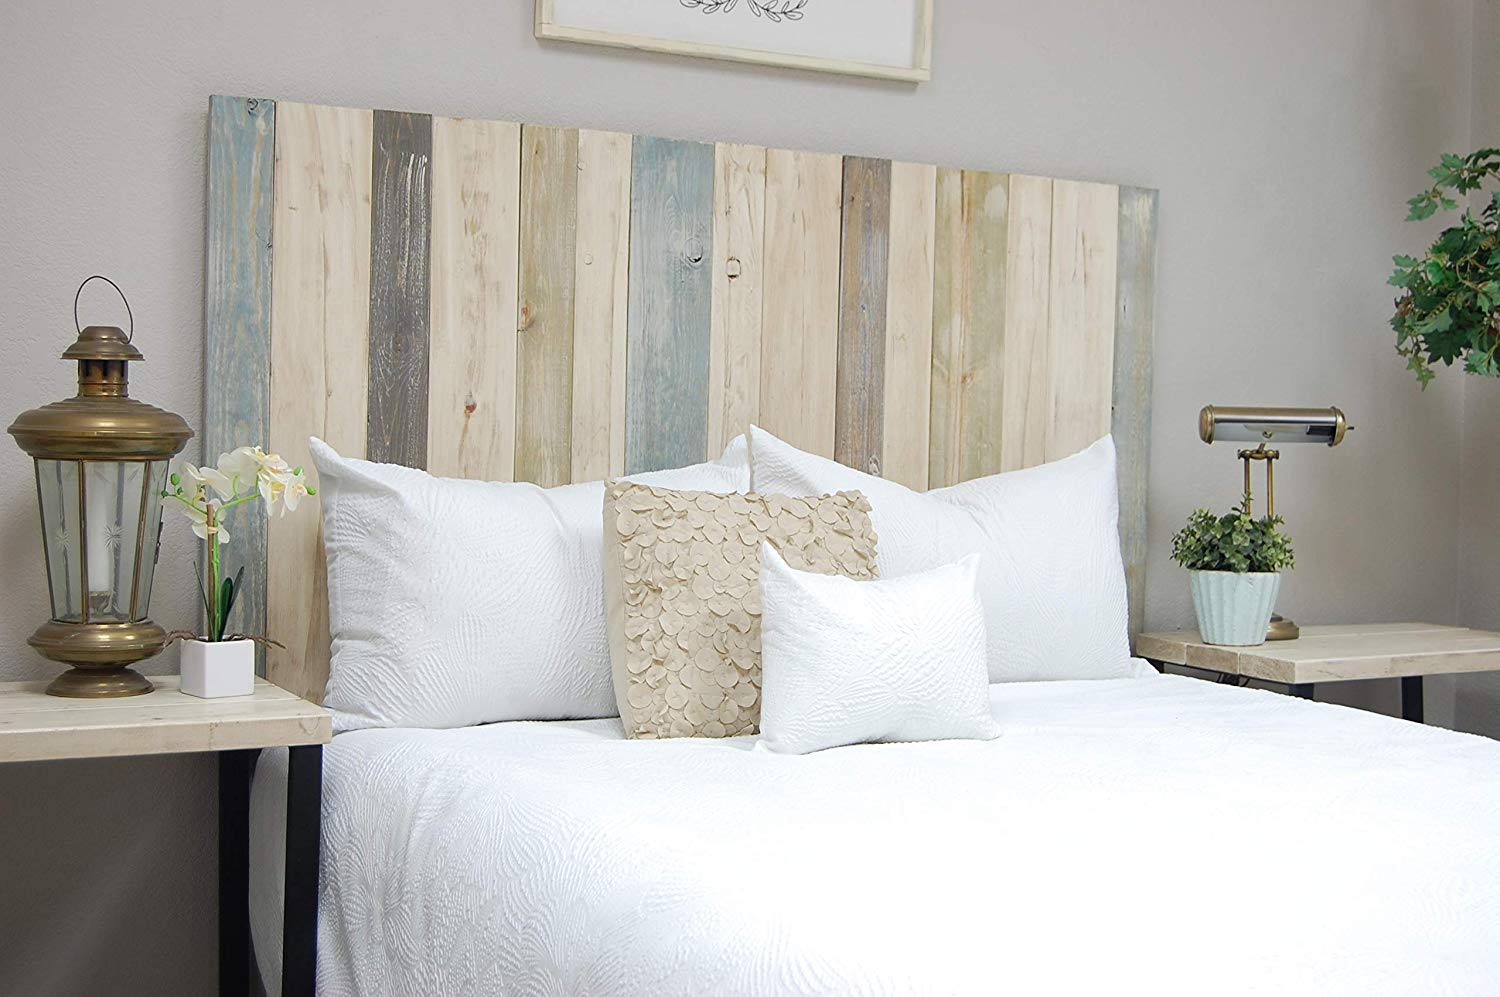 Farmhouse Mix Headboard Twin Size, Hanger Style, Handcrafted. Mounts on Wall. Easy Installation